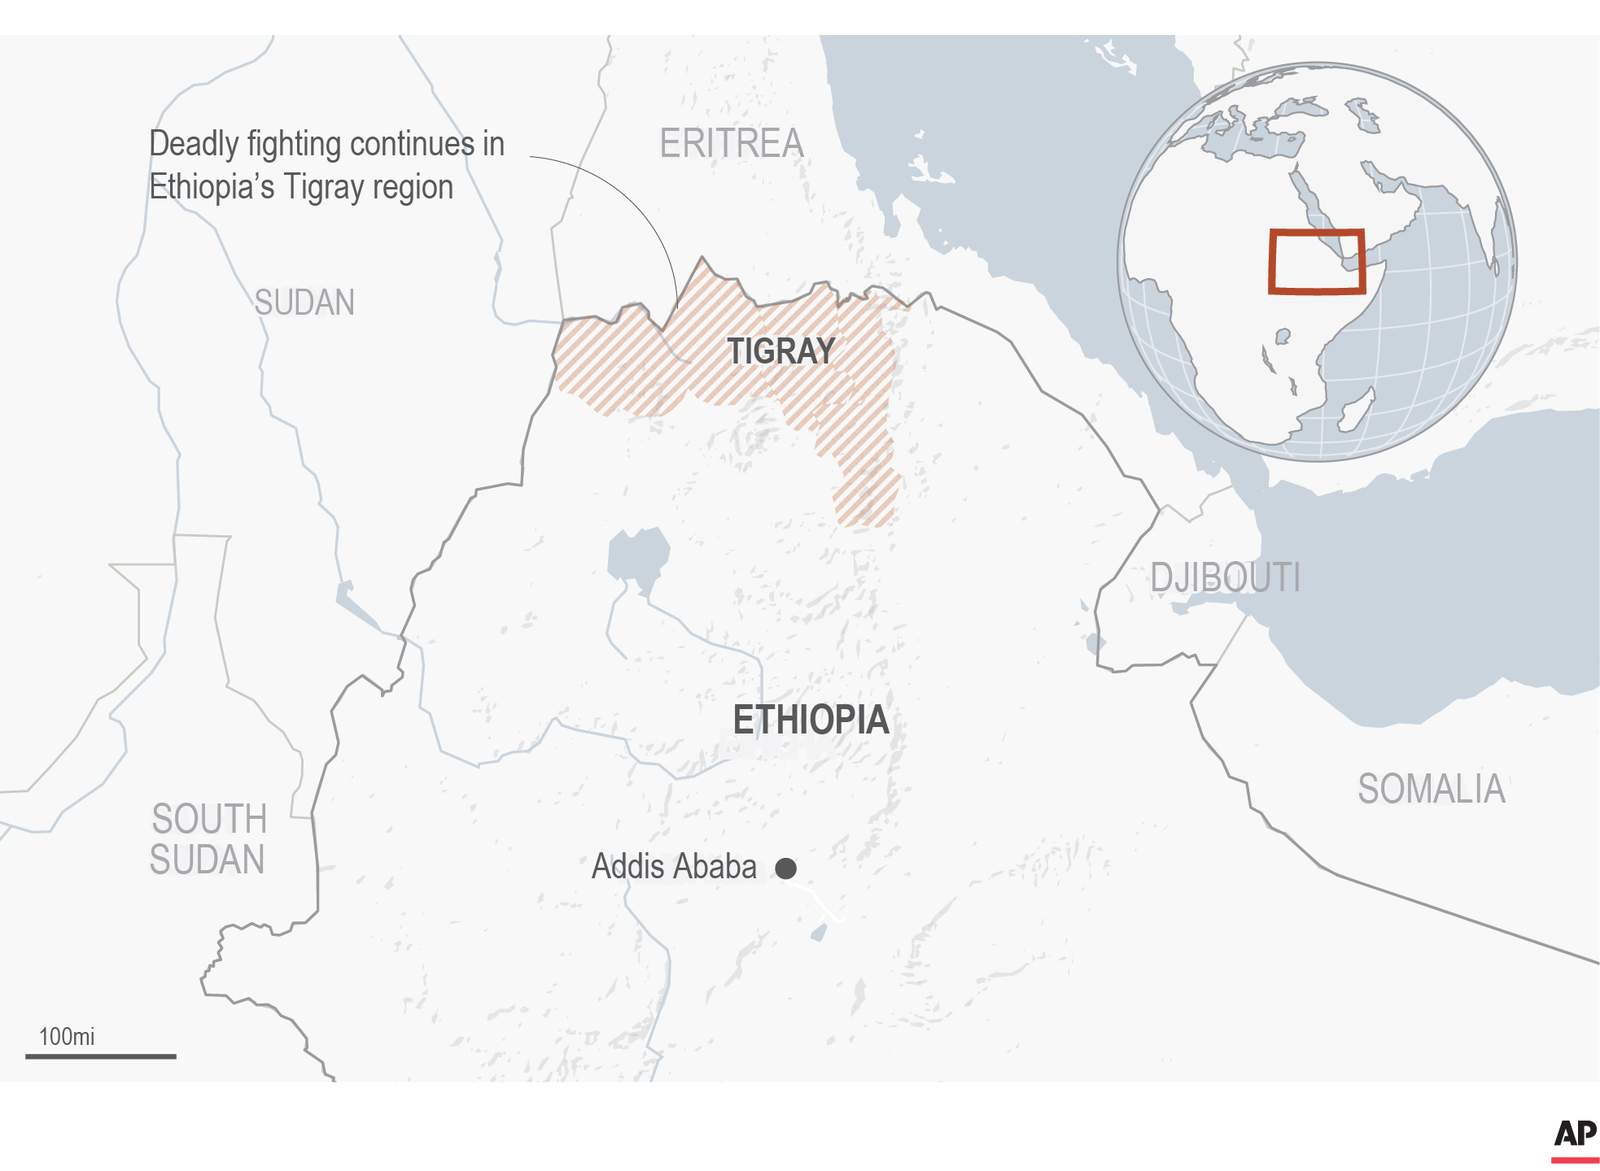 First witness account emerges of Ethiopians fleeing conflict